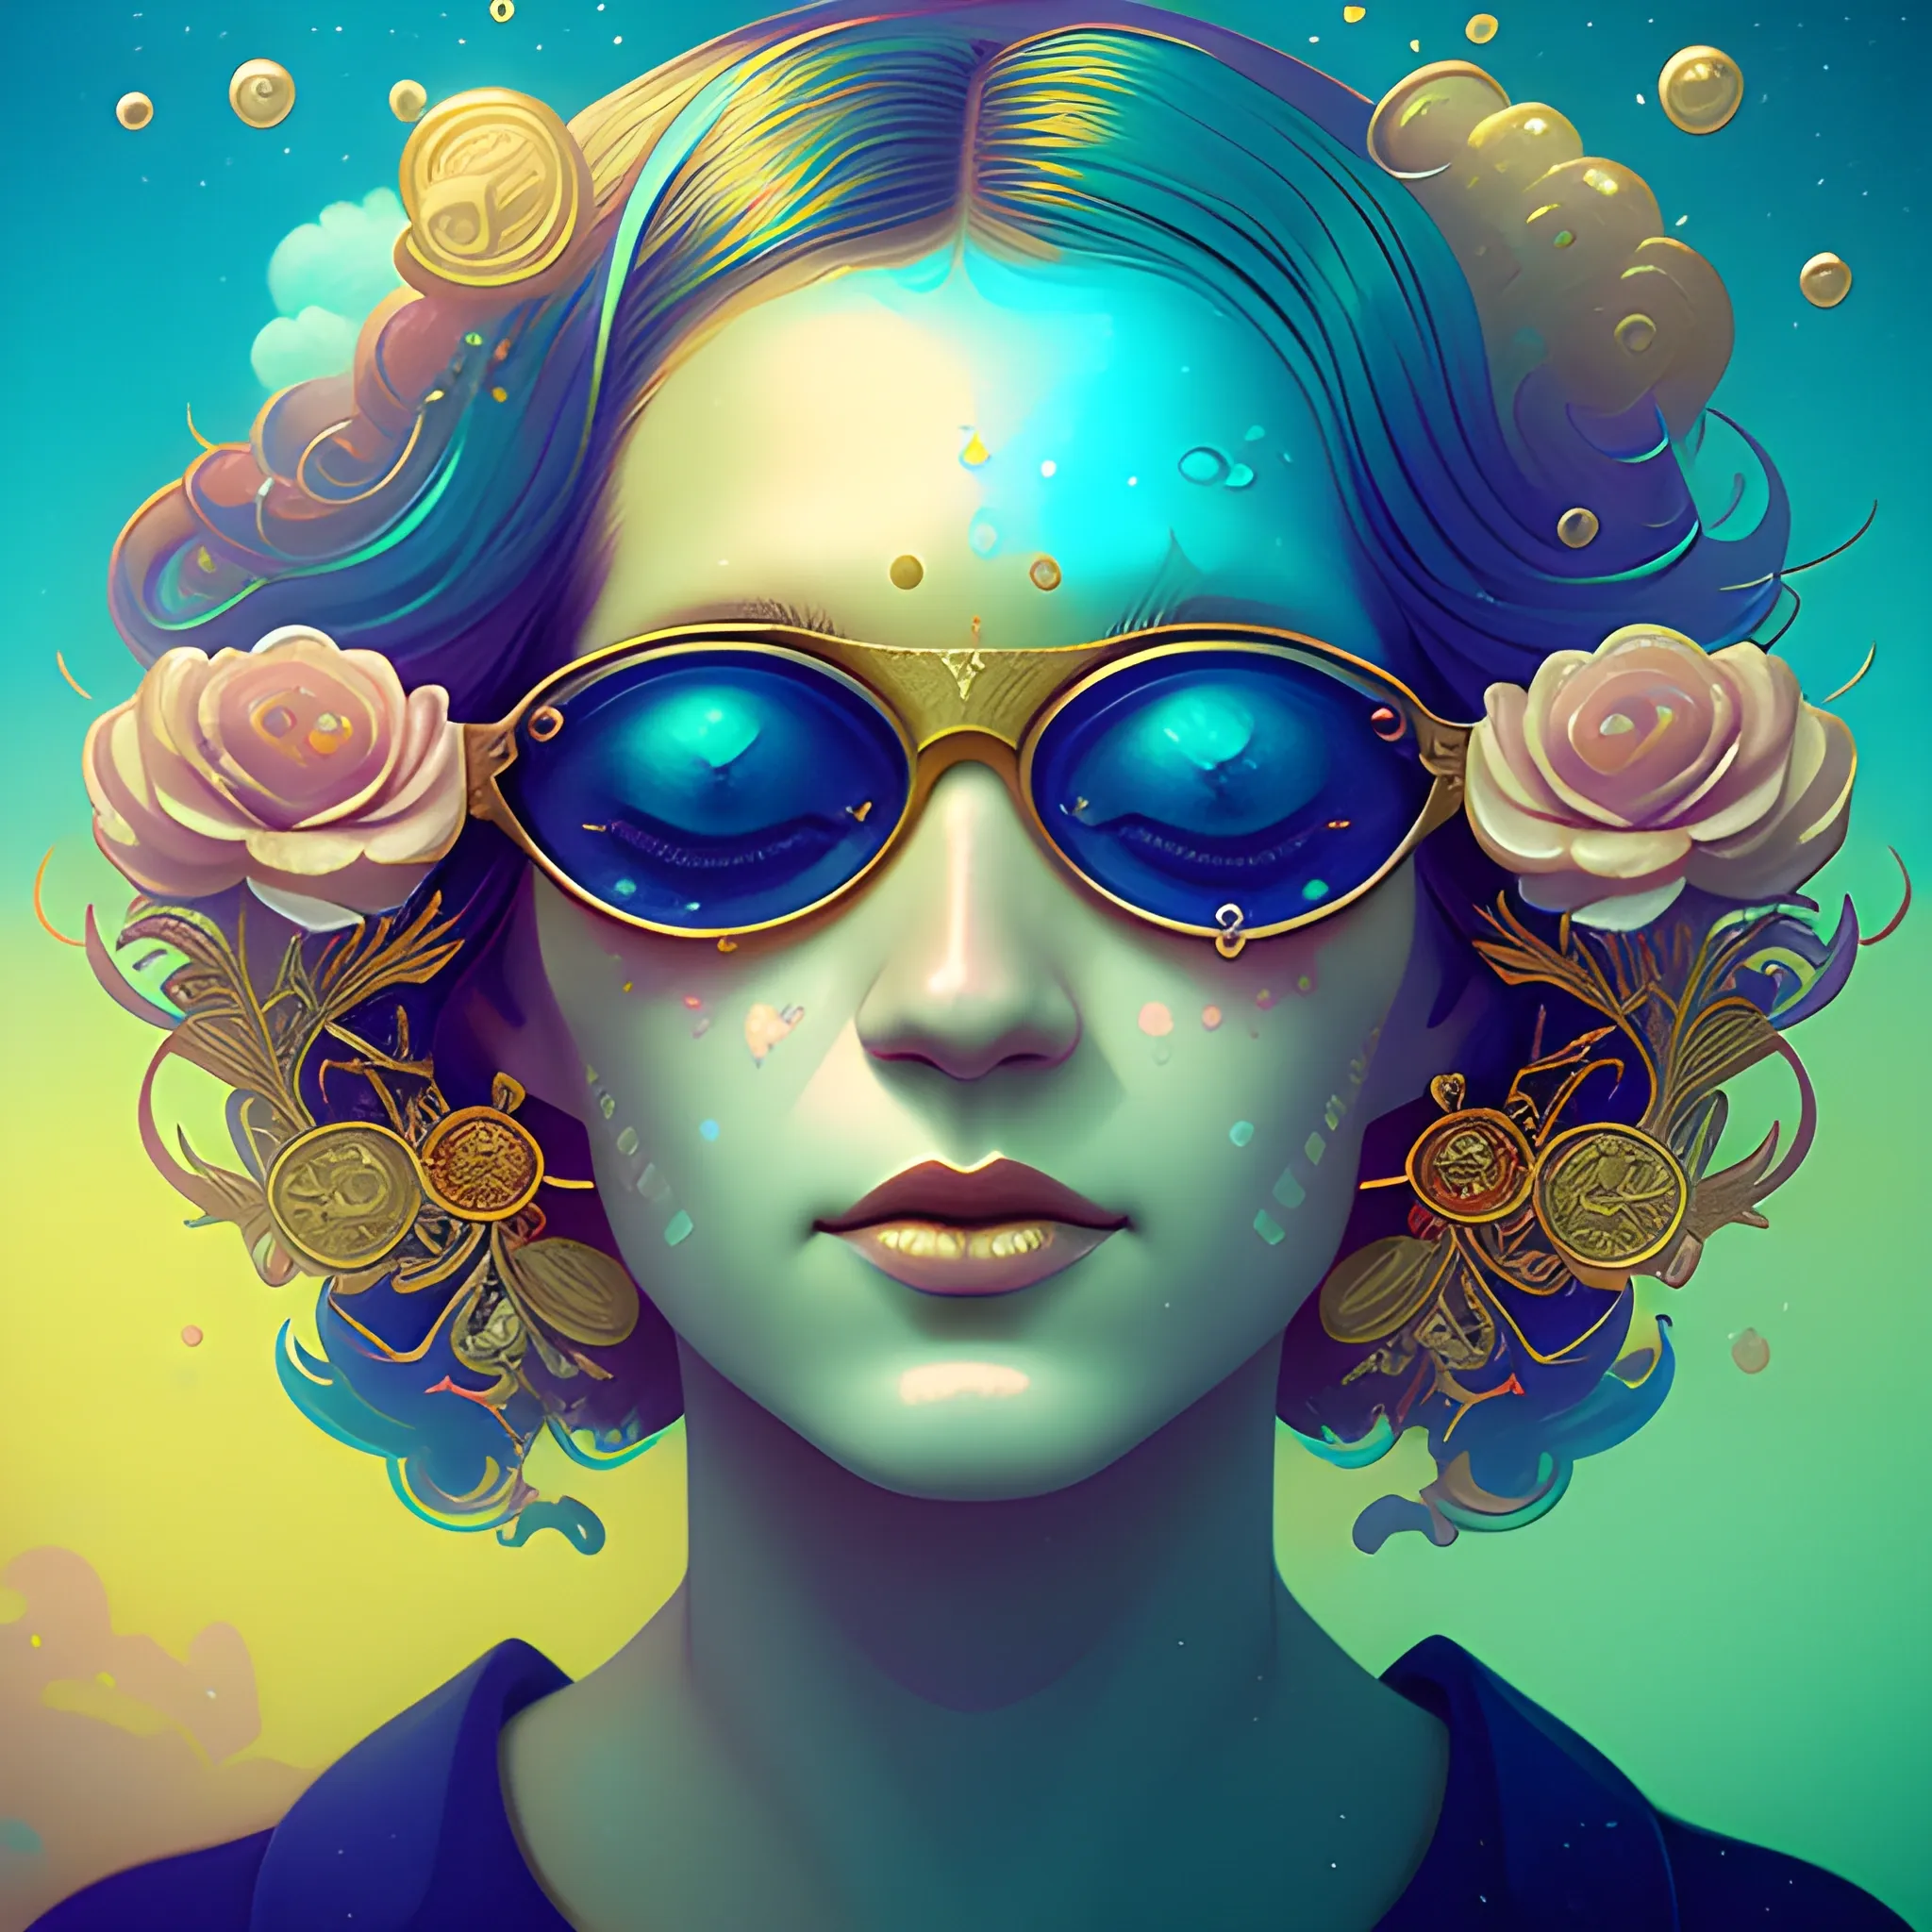 Flowery beautiful face with gold jewellery, by petros afshar, ross tran, Tom Bagshaw, tom whalen, underwater bubbly psychedelic clouds, Anaglyph 3D lens blur effect